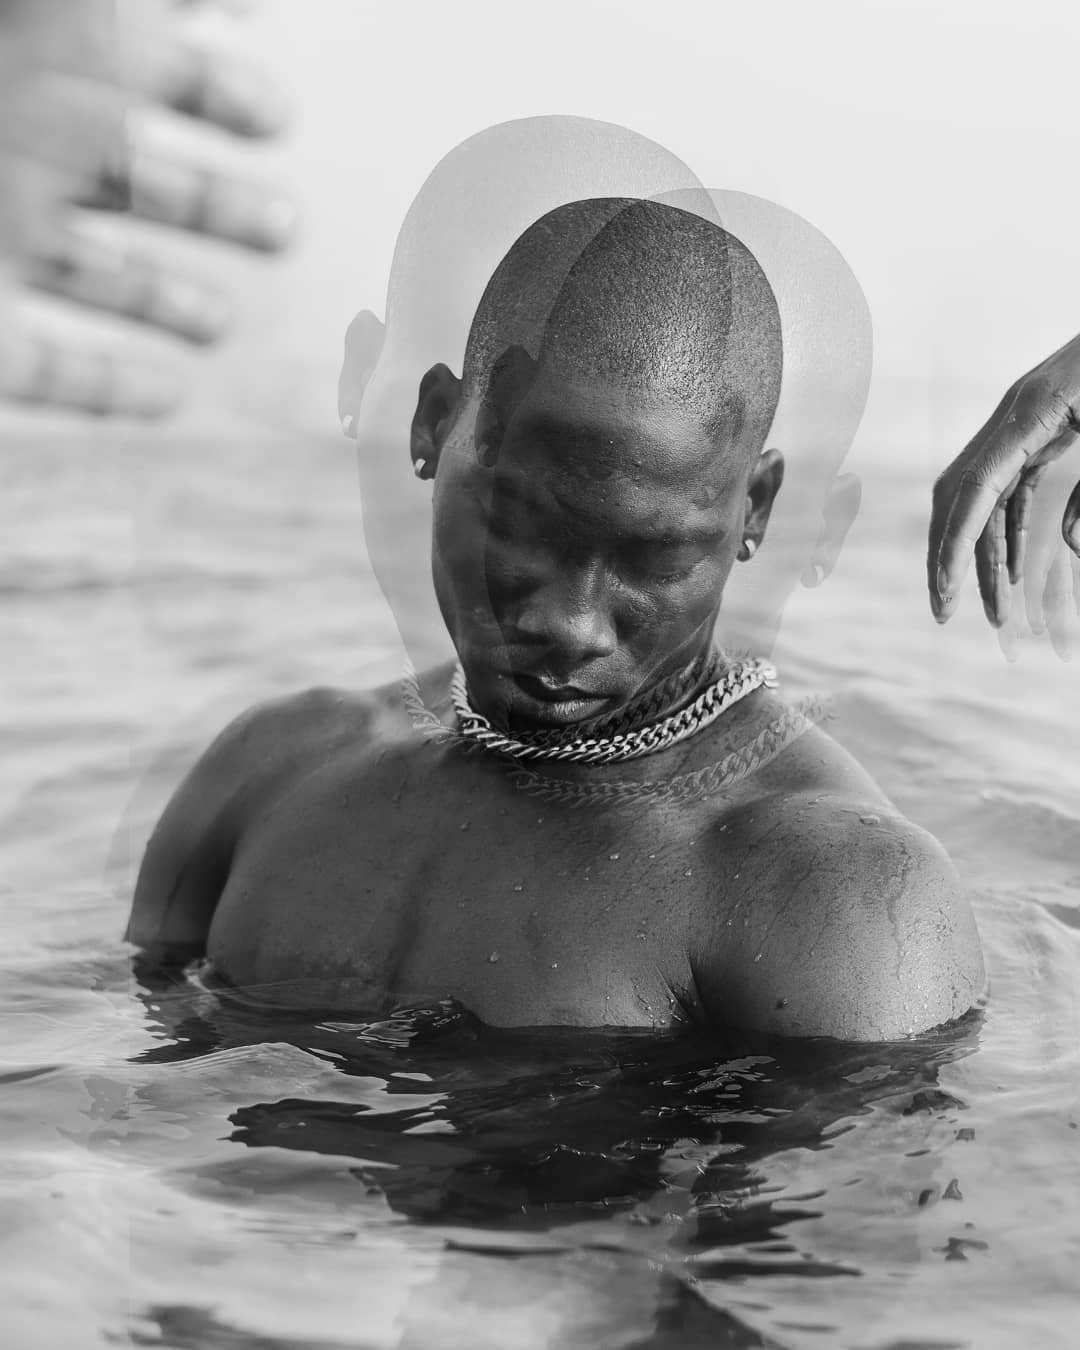 Adeolu Osibodu puts us in a trance with his otherworldly photos inspired by nature